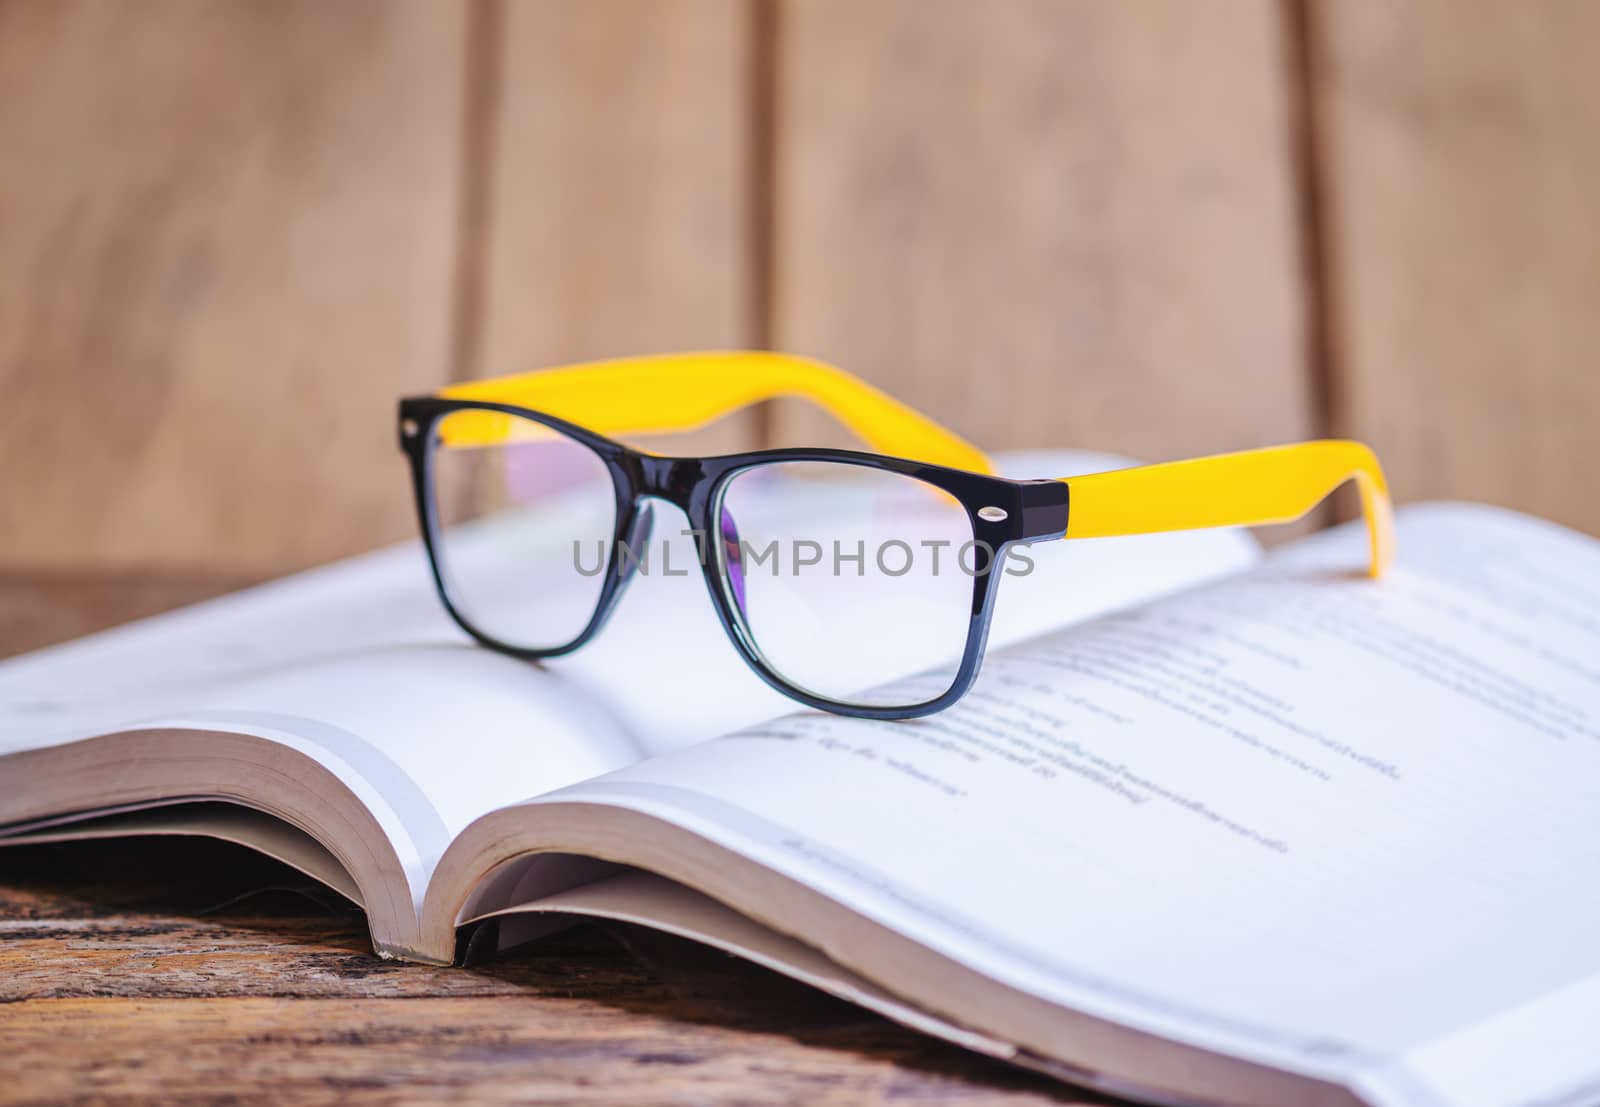 Glasses on the book blurred background by Suwanmanee